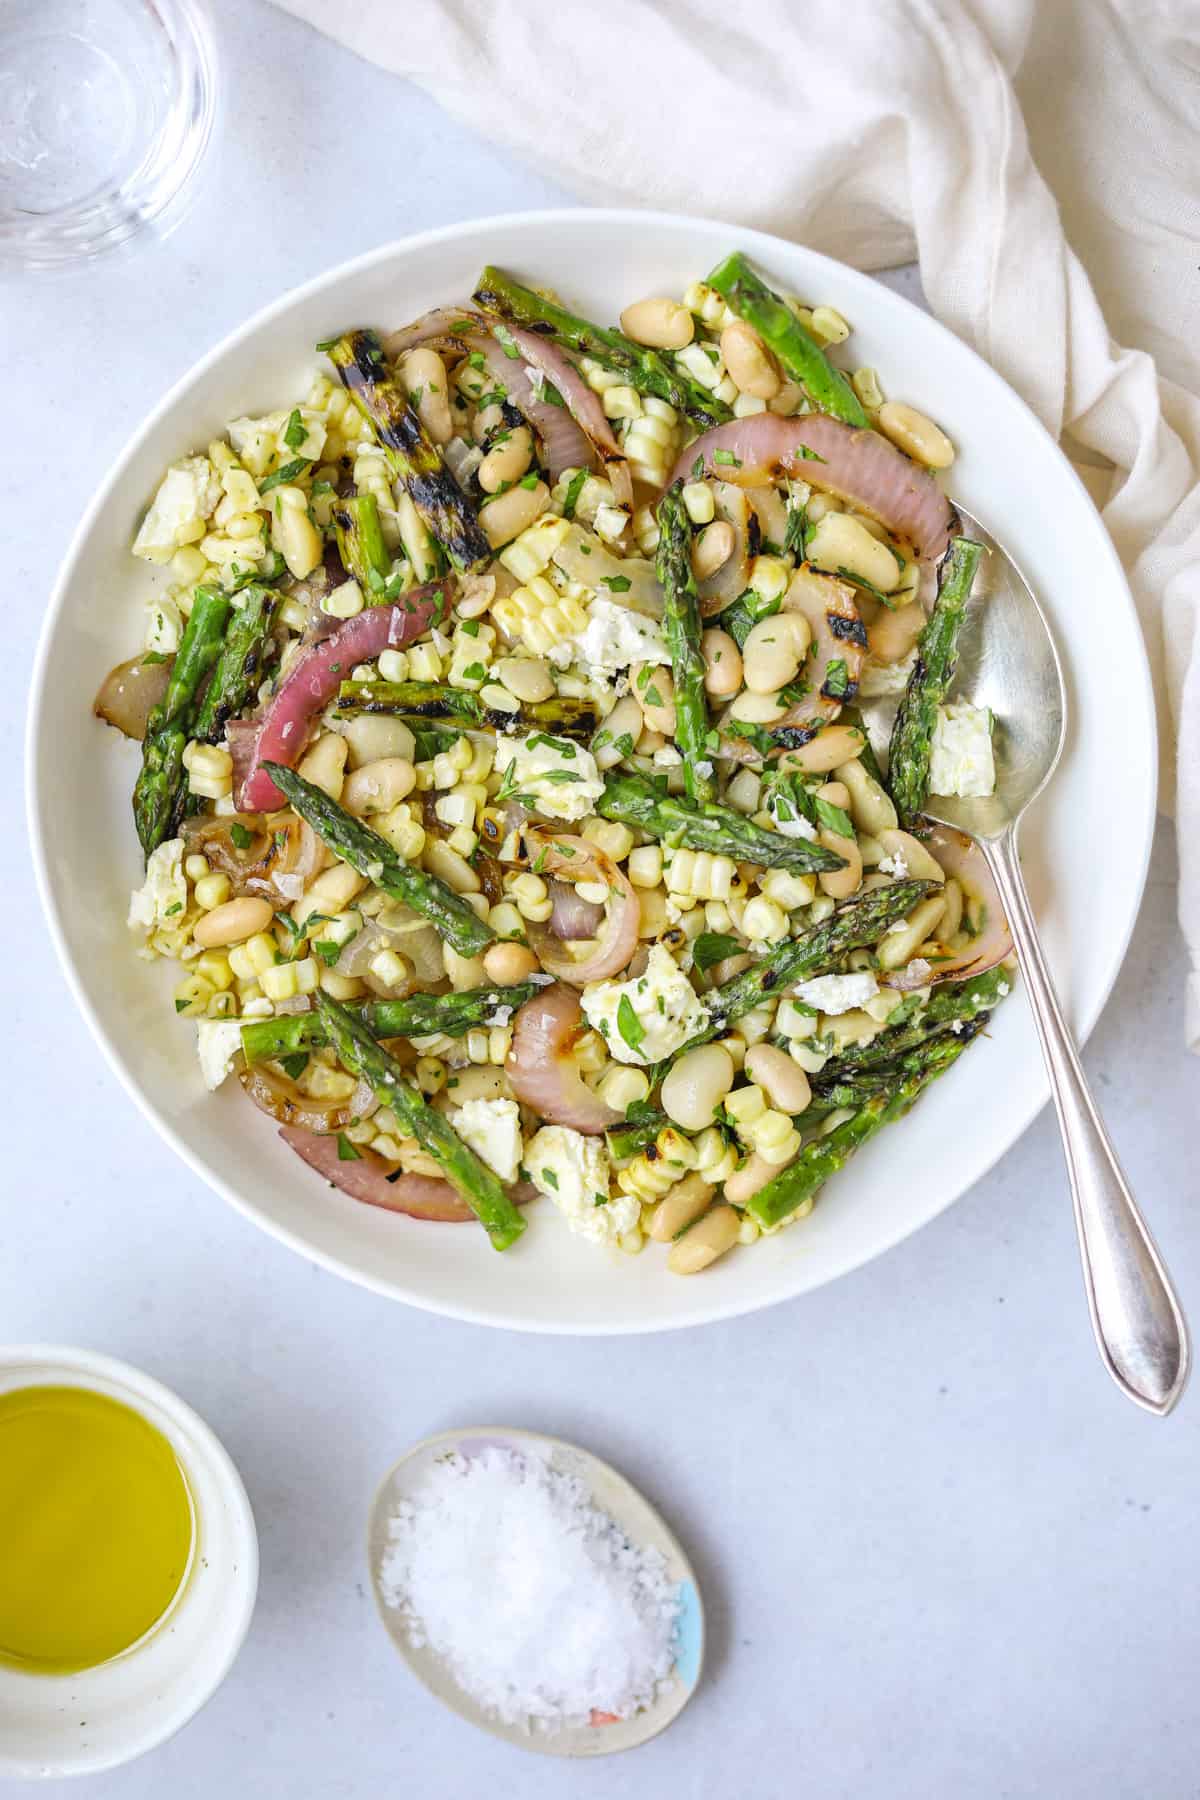 Warm Grilled Vegetable Salad with White Beans and Feta